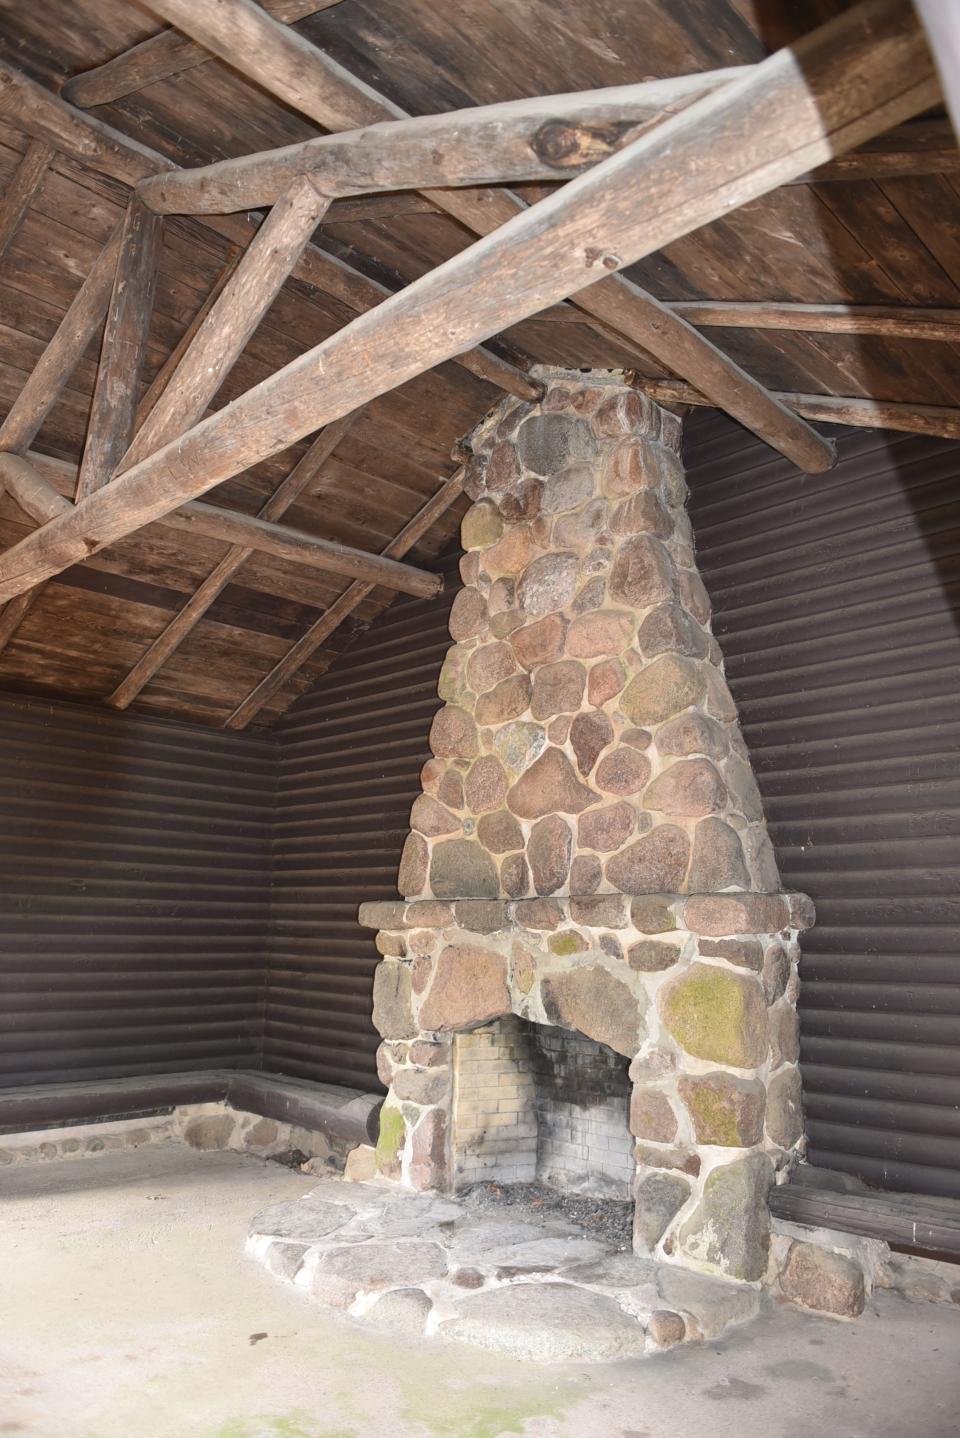 The picnic shelter at Green Lake Park was listed on the National Register of Historic Places in 1996. It was built in 1937 by members of the Civilian Conservation Corps using local materials. One of the CCC crew was a blacksmith, carpenter and mason named Clarence Way, and he built the fireplace and chimney.